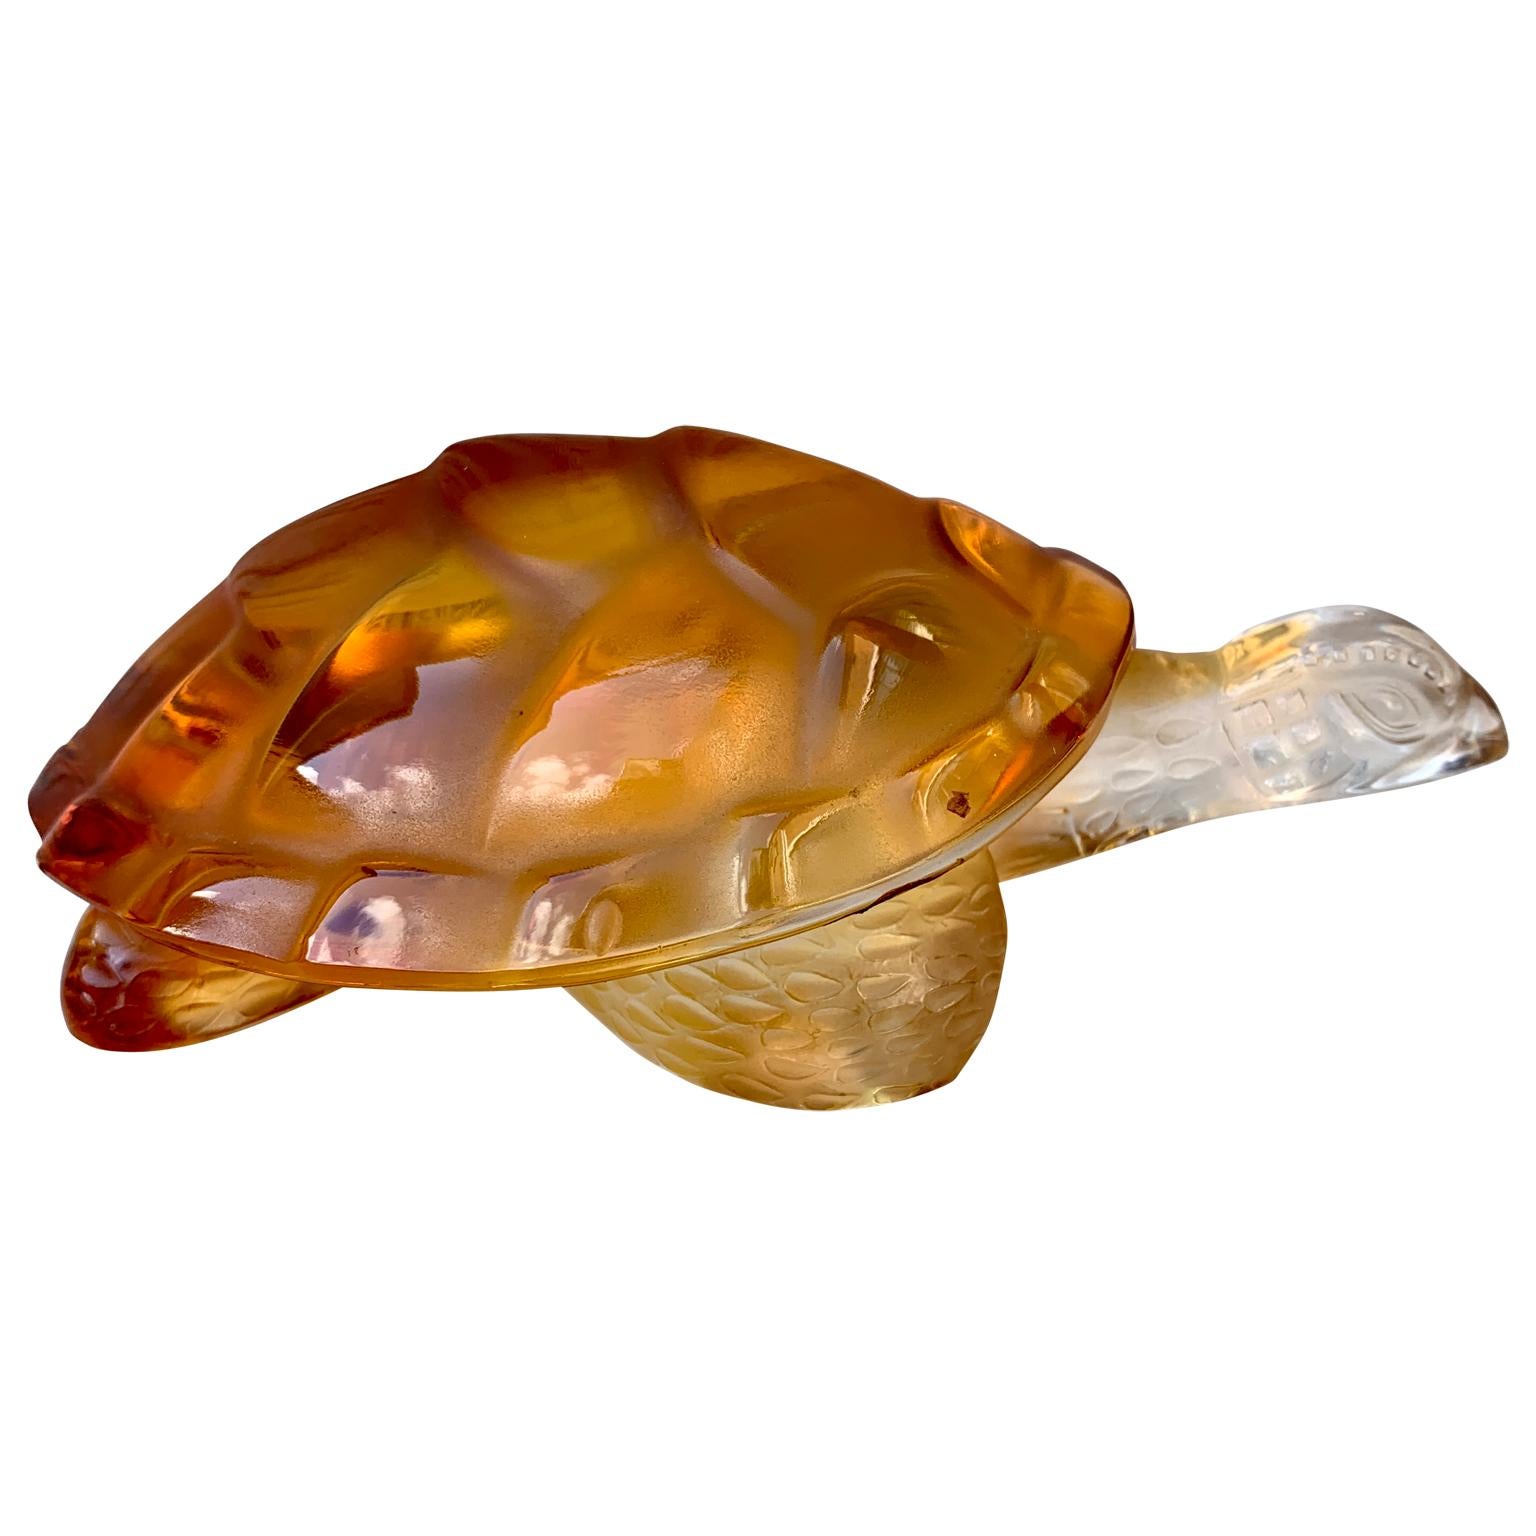 A Vintage figurine or letter weight in clear and amber crystal glass Caroline tortoise signed on the bottom 